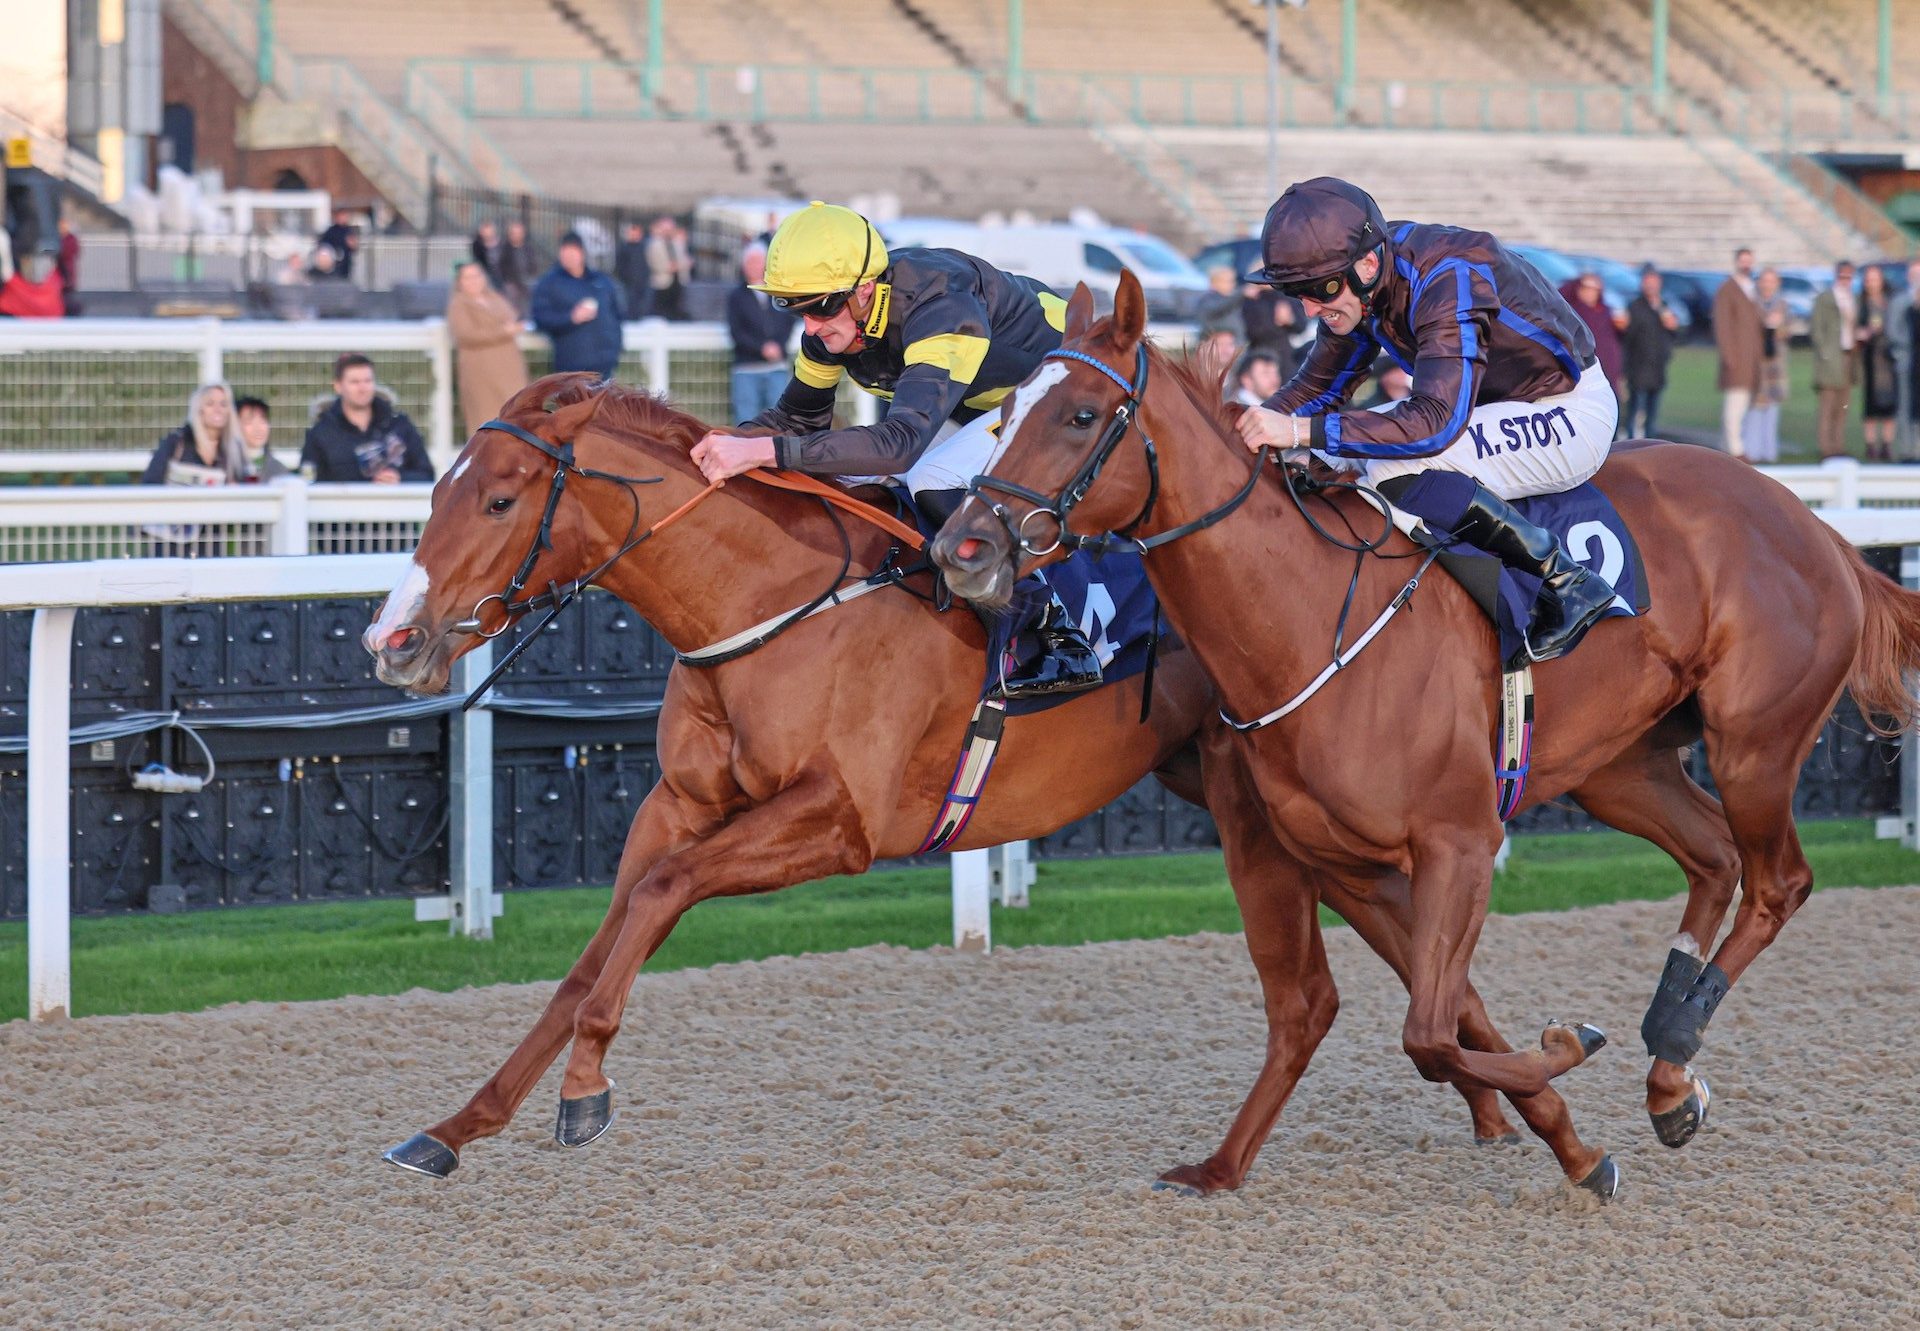 Filly One (Calyx) Wins On Debut at Newcastle